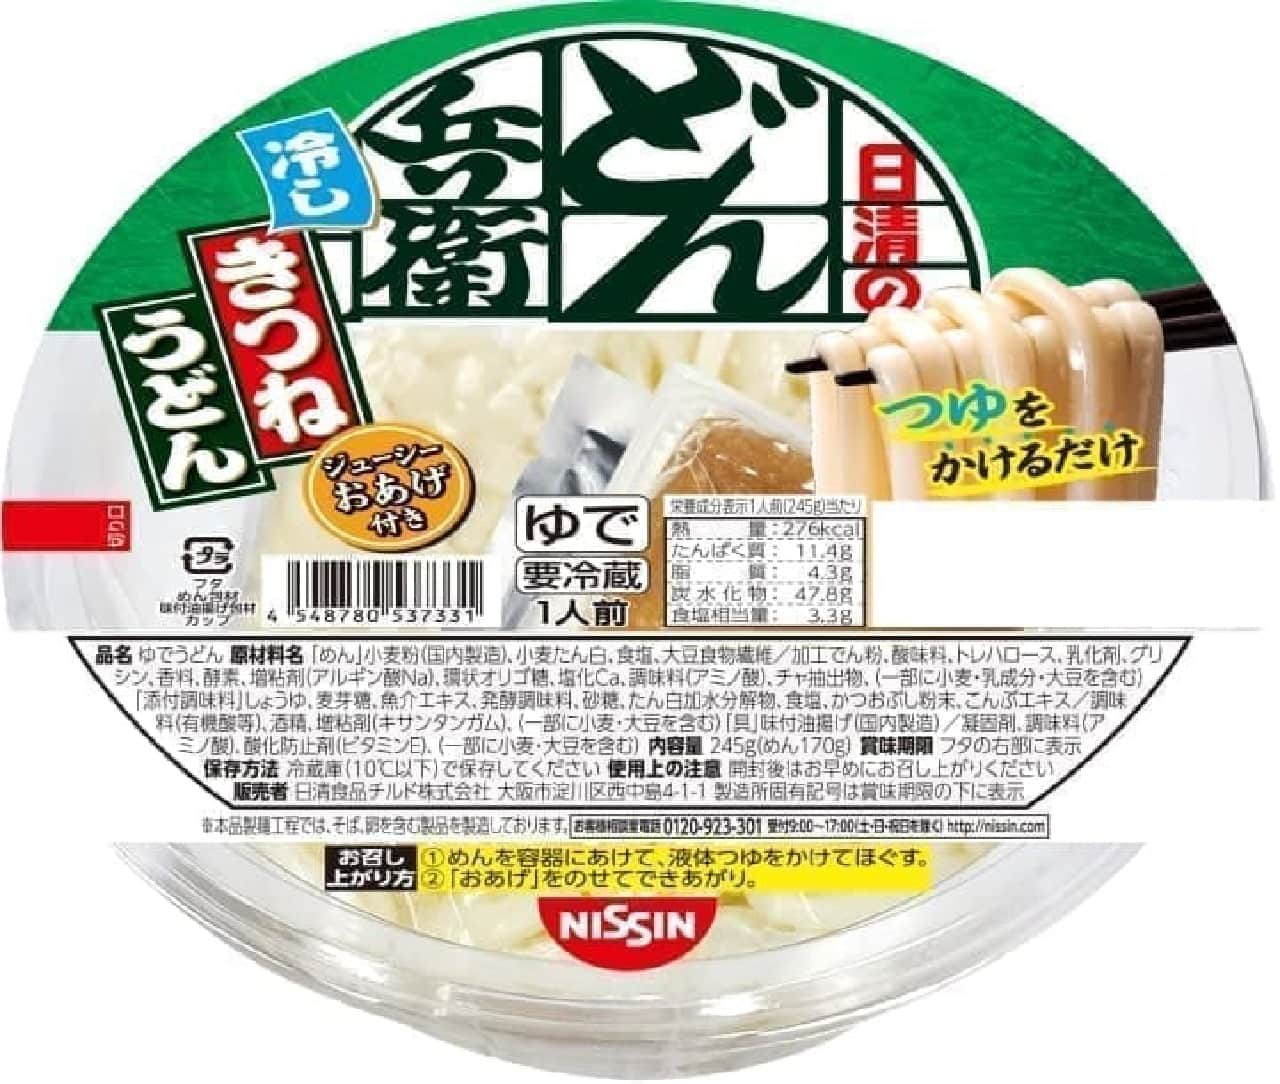 Nissin Foods "Chilled Cup Nissin Donbei Cold Kitsune Udon"